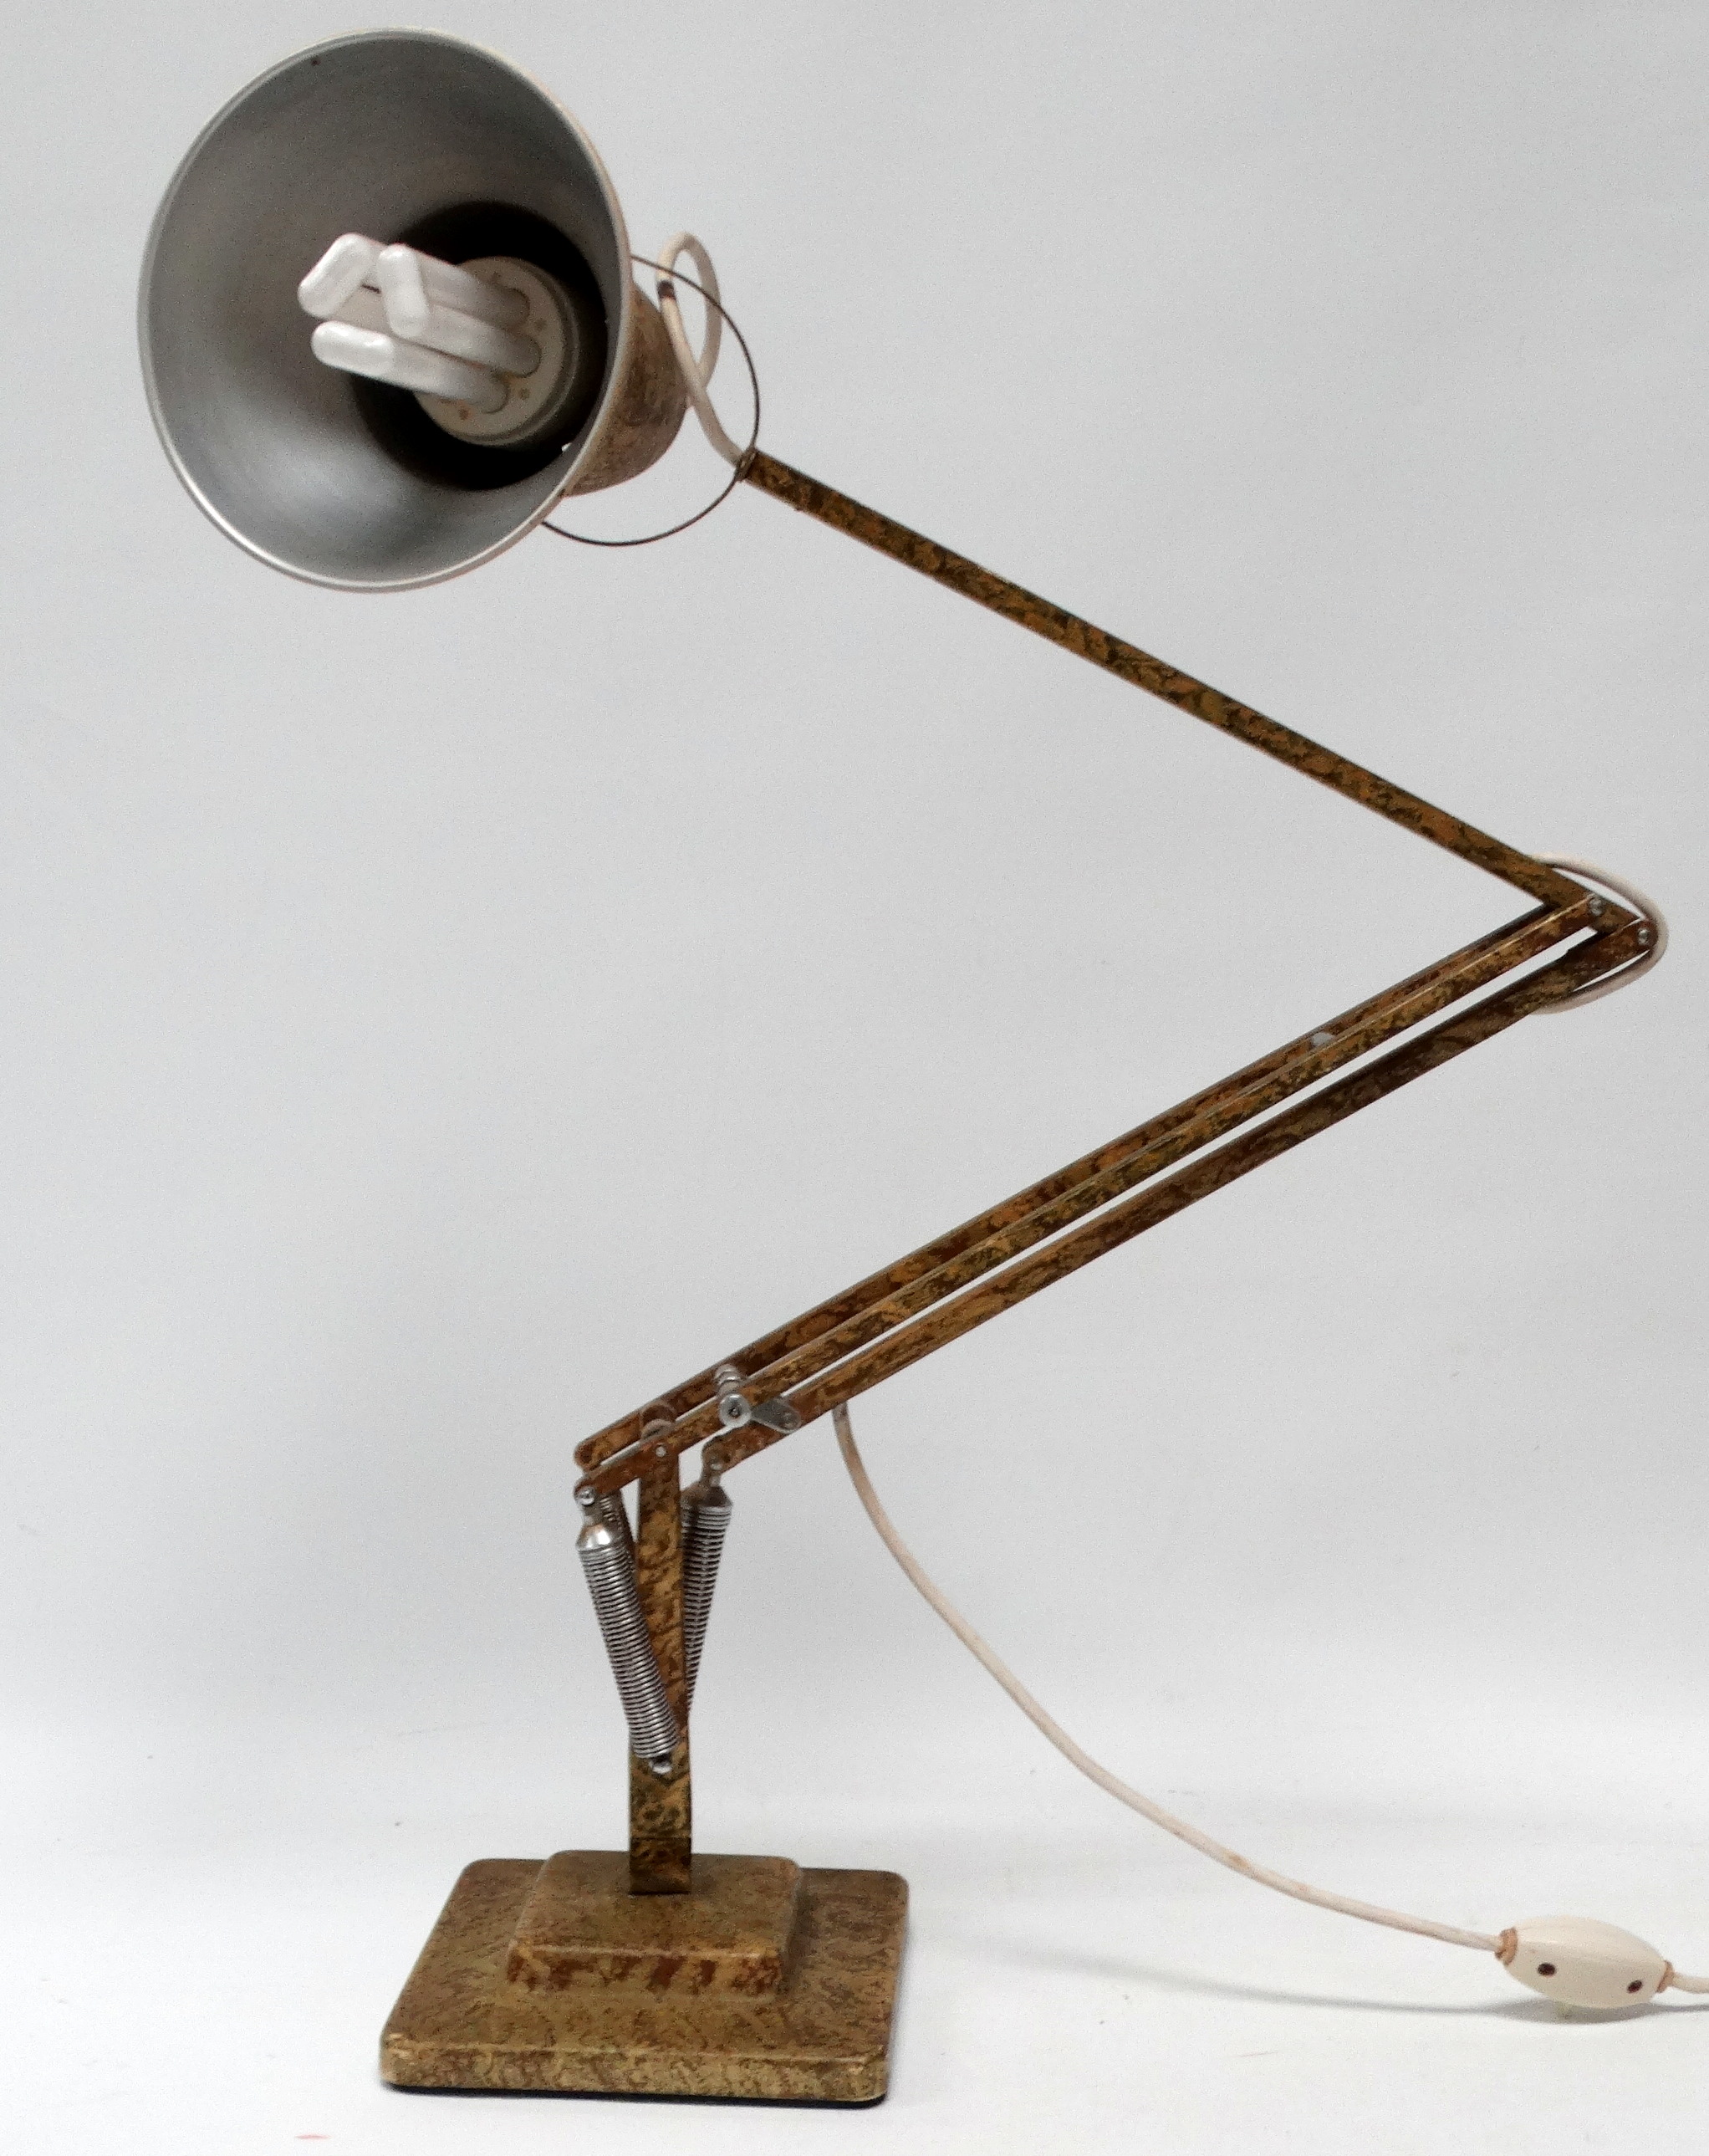 A Herbert Terry Anglepoise lamp - with a square stepped base and cream scumbled finish.